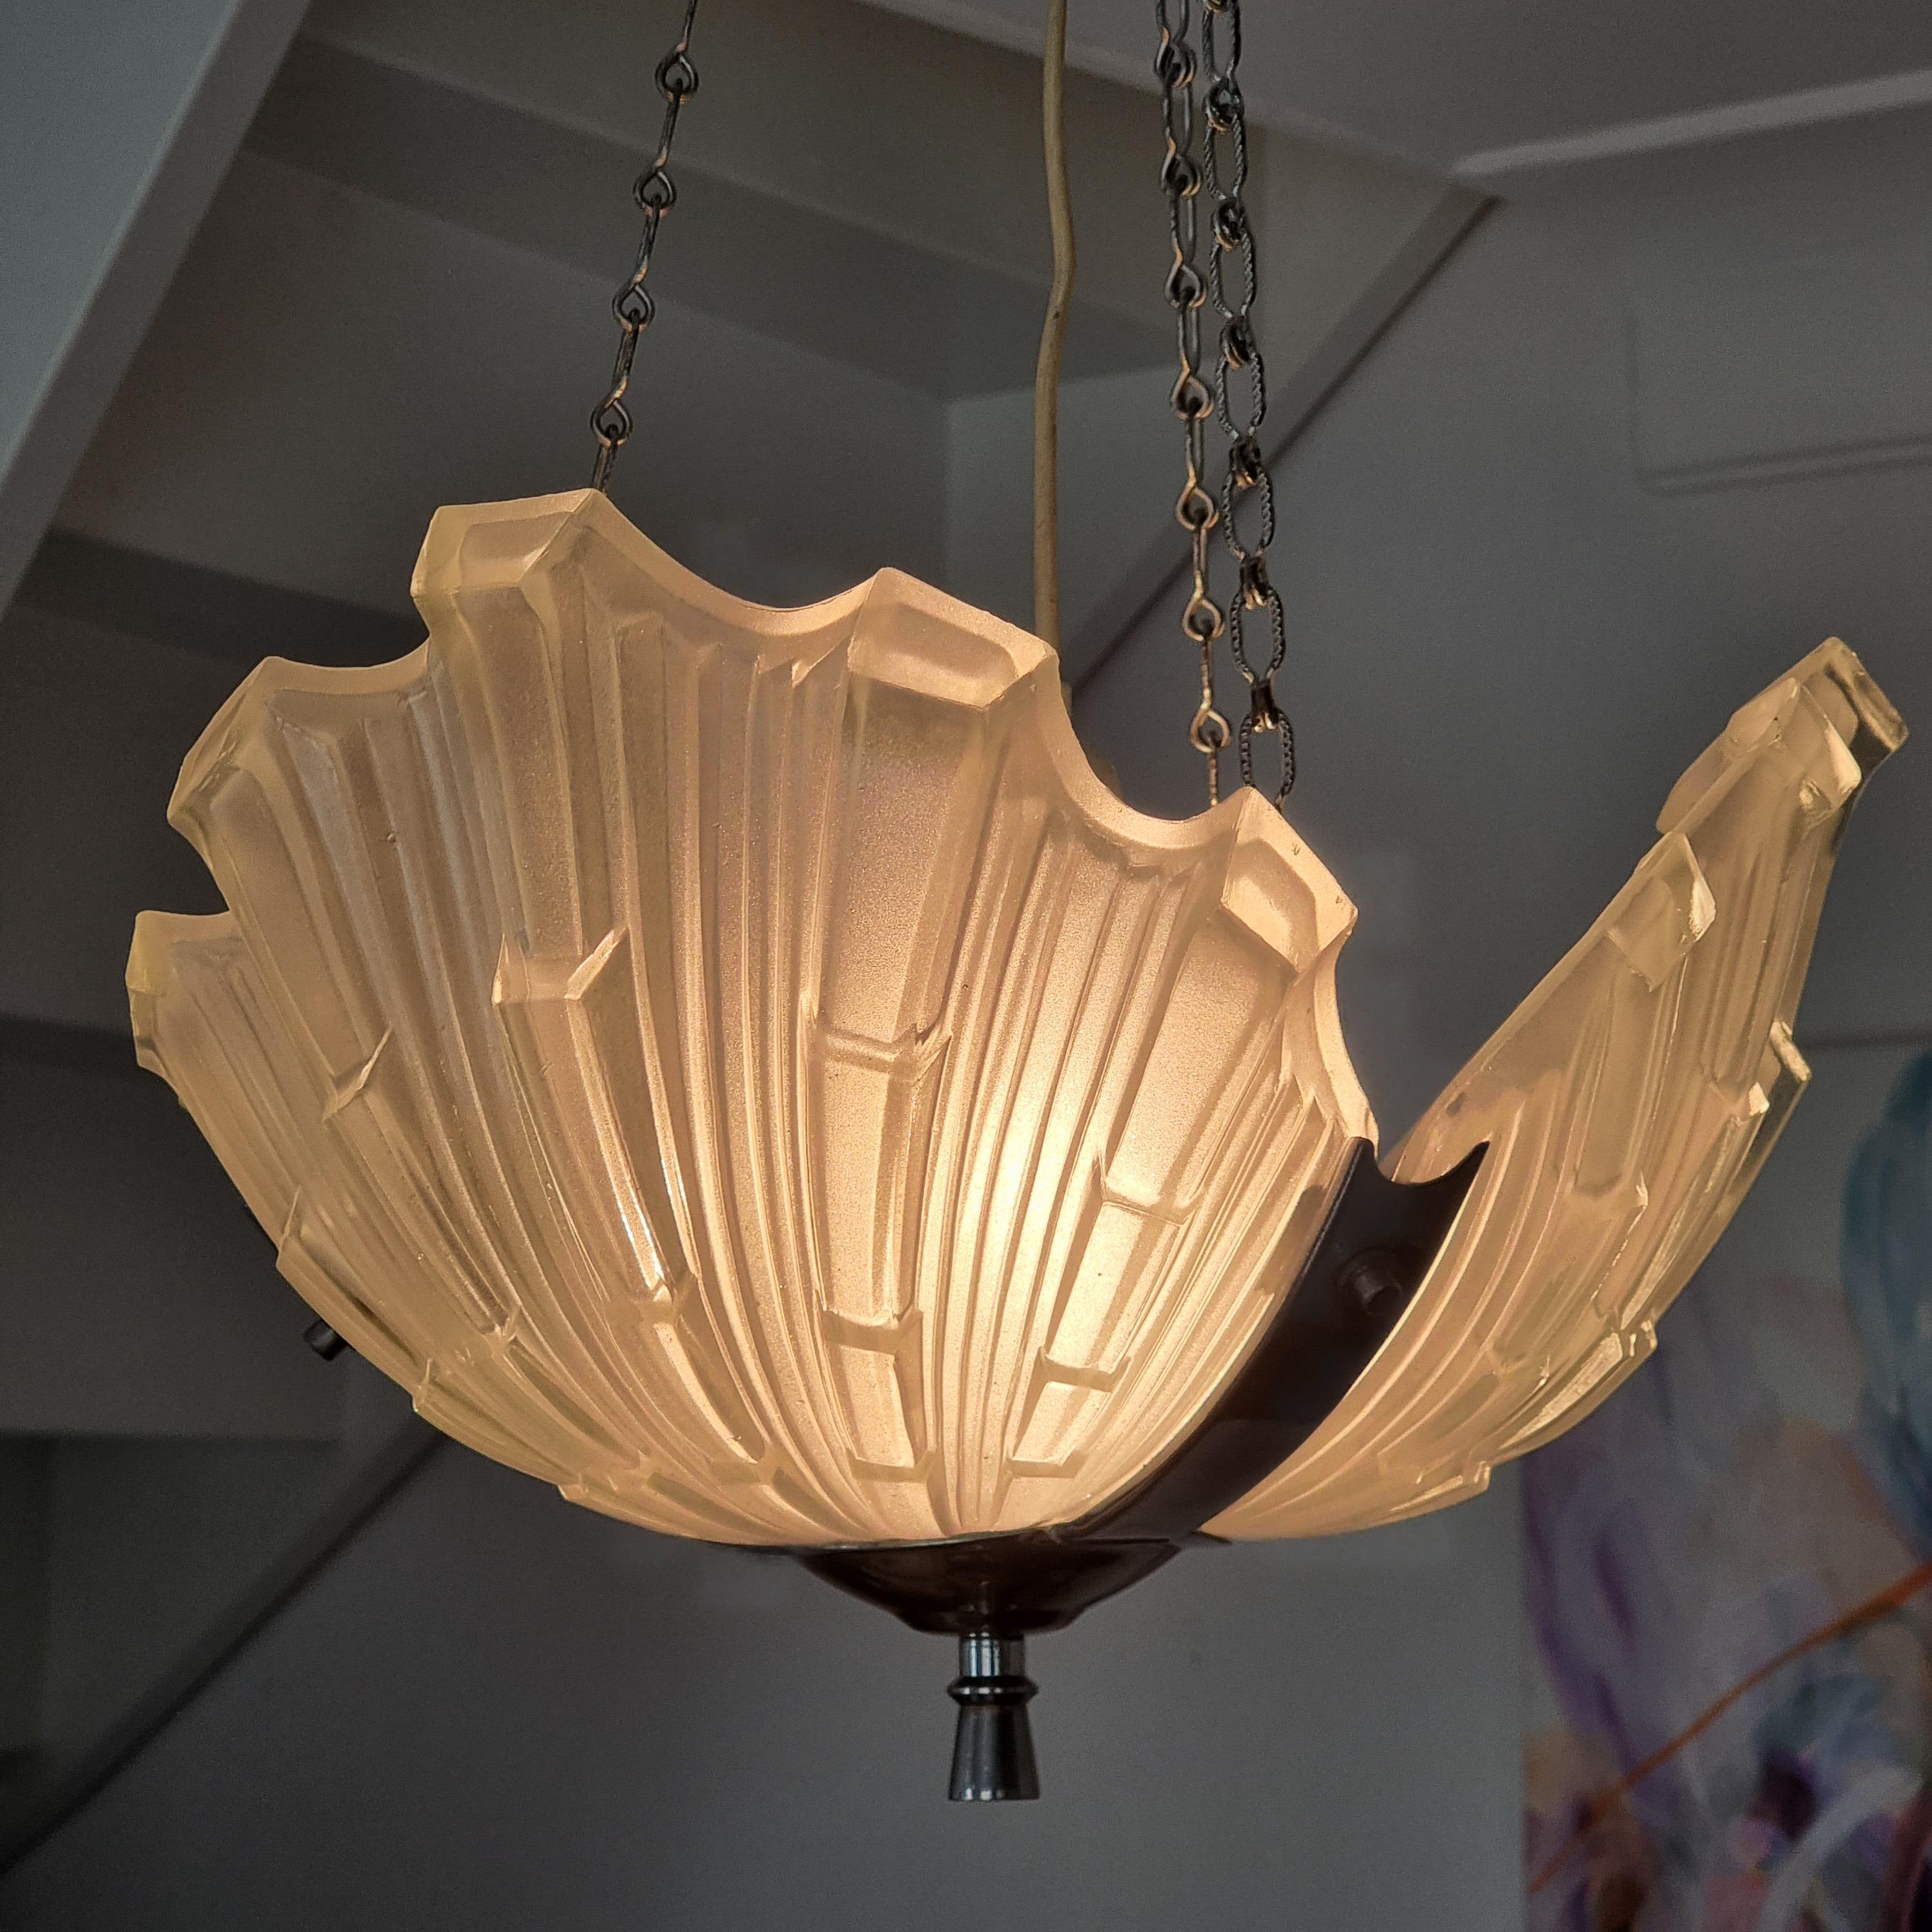 Mid-20th Century Swedish Grace / Art Deco Pendant, Clam-Shaped Glass Shades, with Provenance For Sale